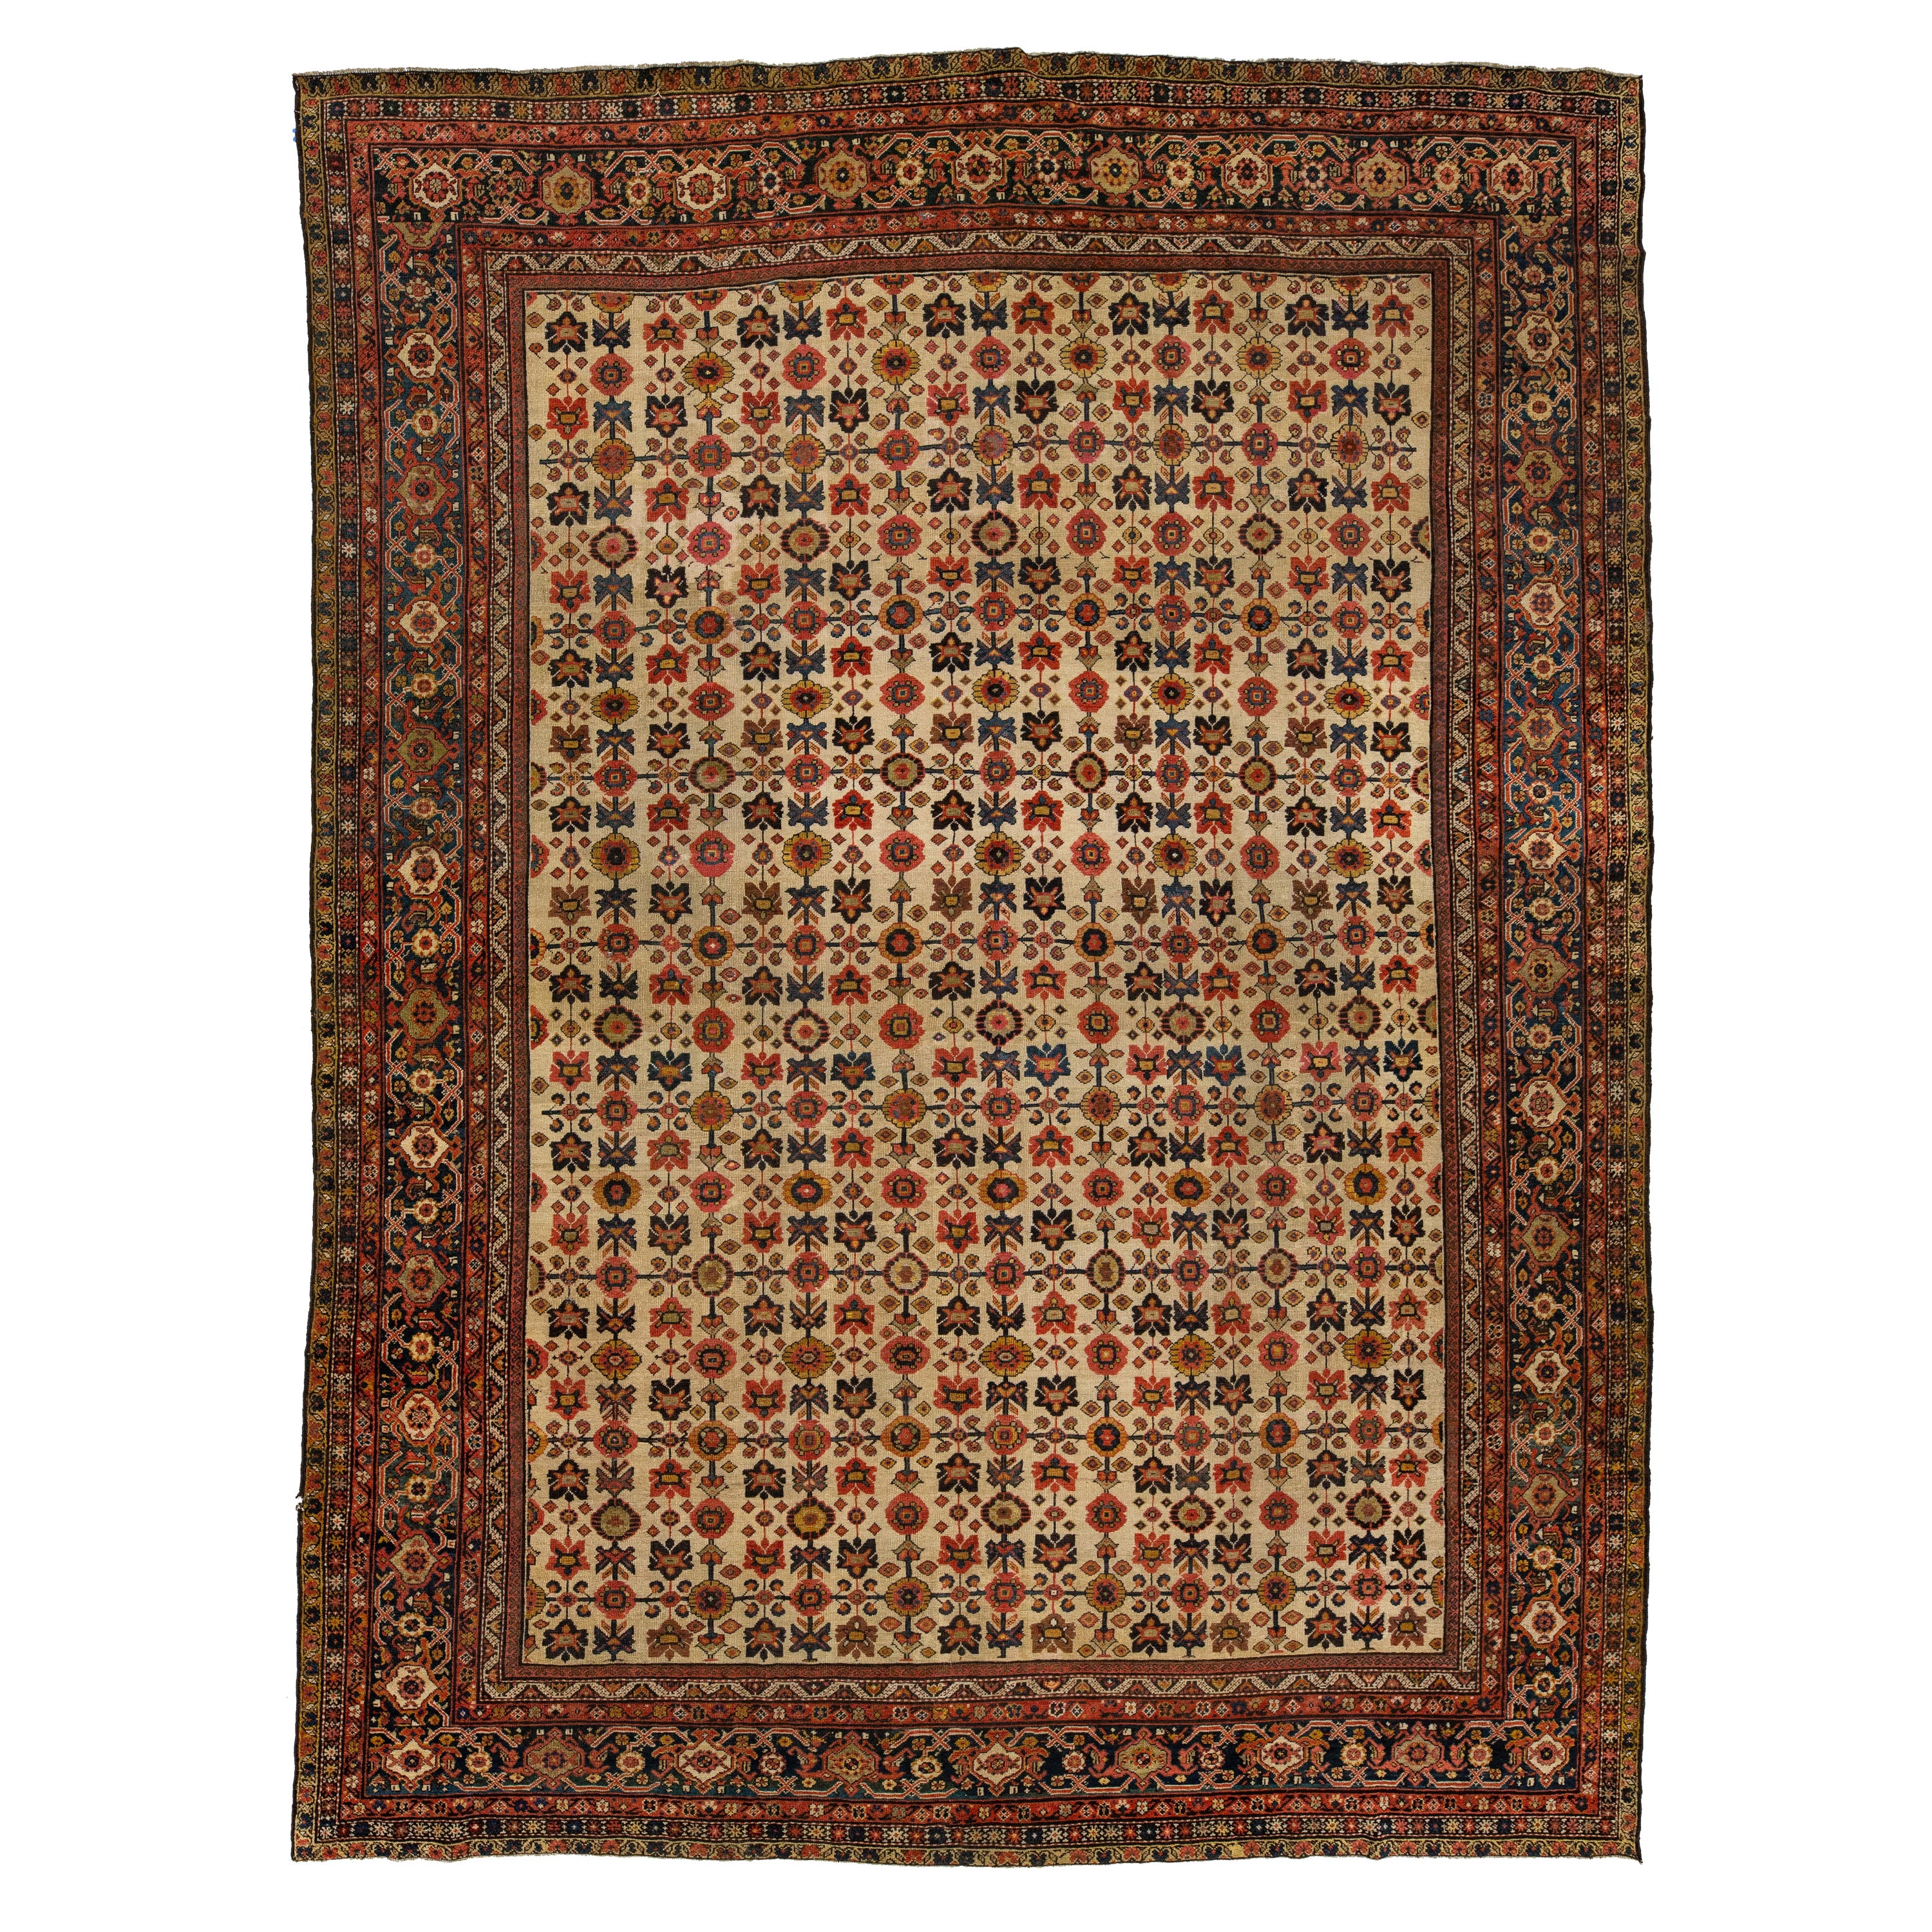 1880s Antique Persian Farahan Tan Wool Rug Handmade With Allover Floral Pattern For Sale